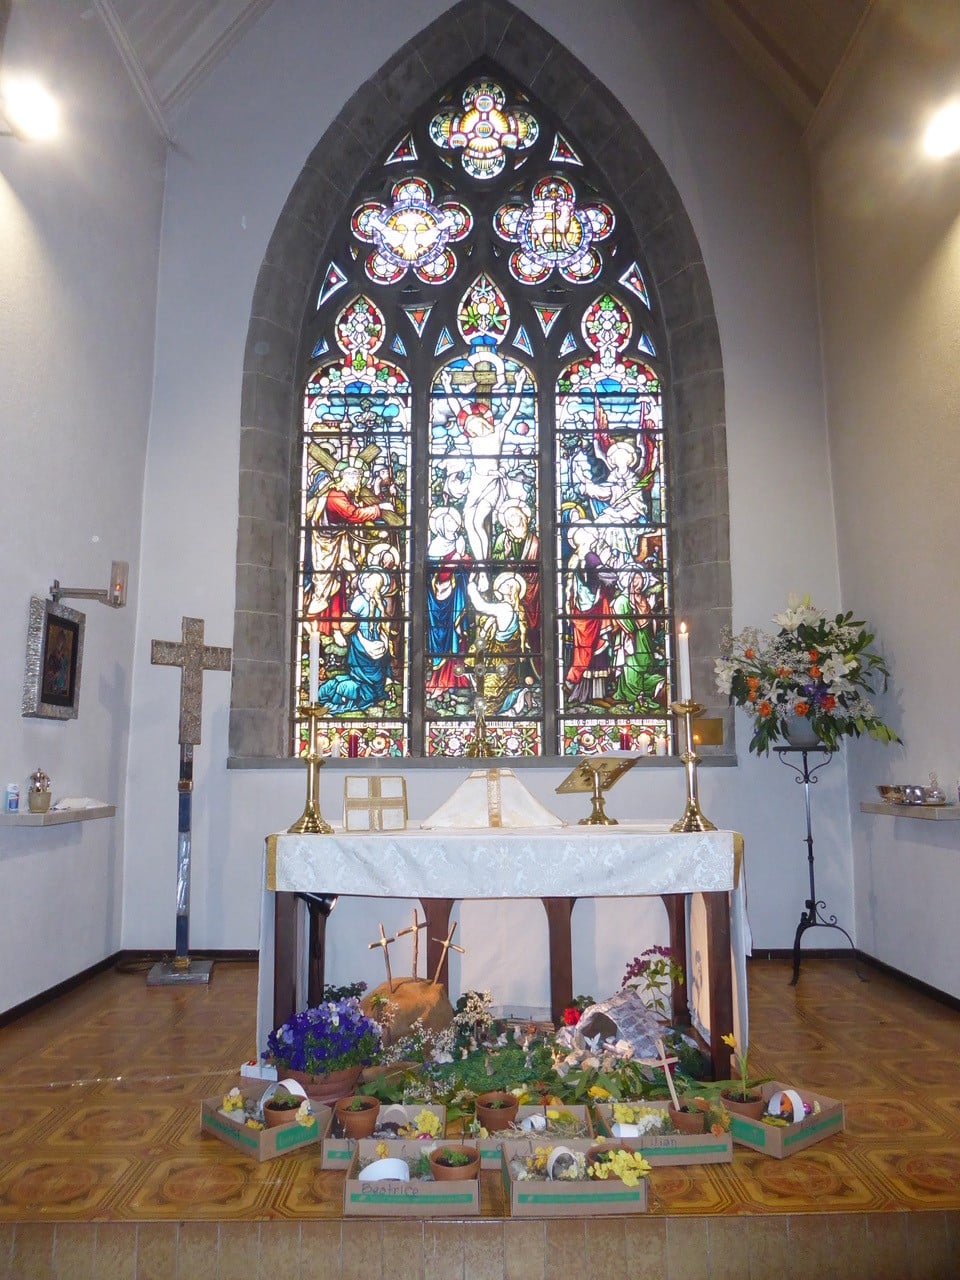 Easter donations infront of a large stained glass window.